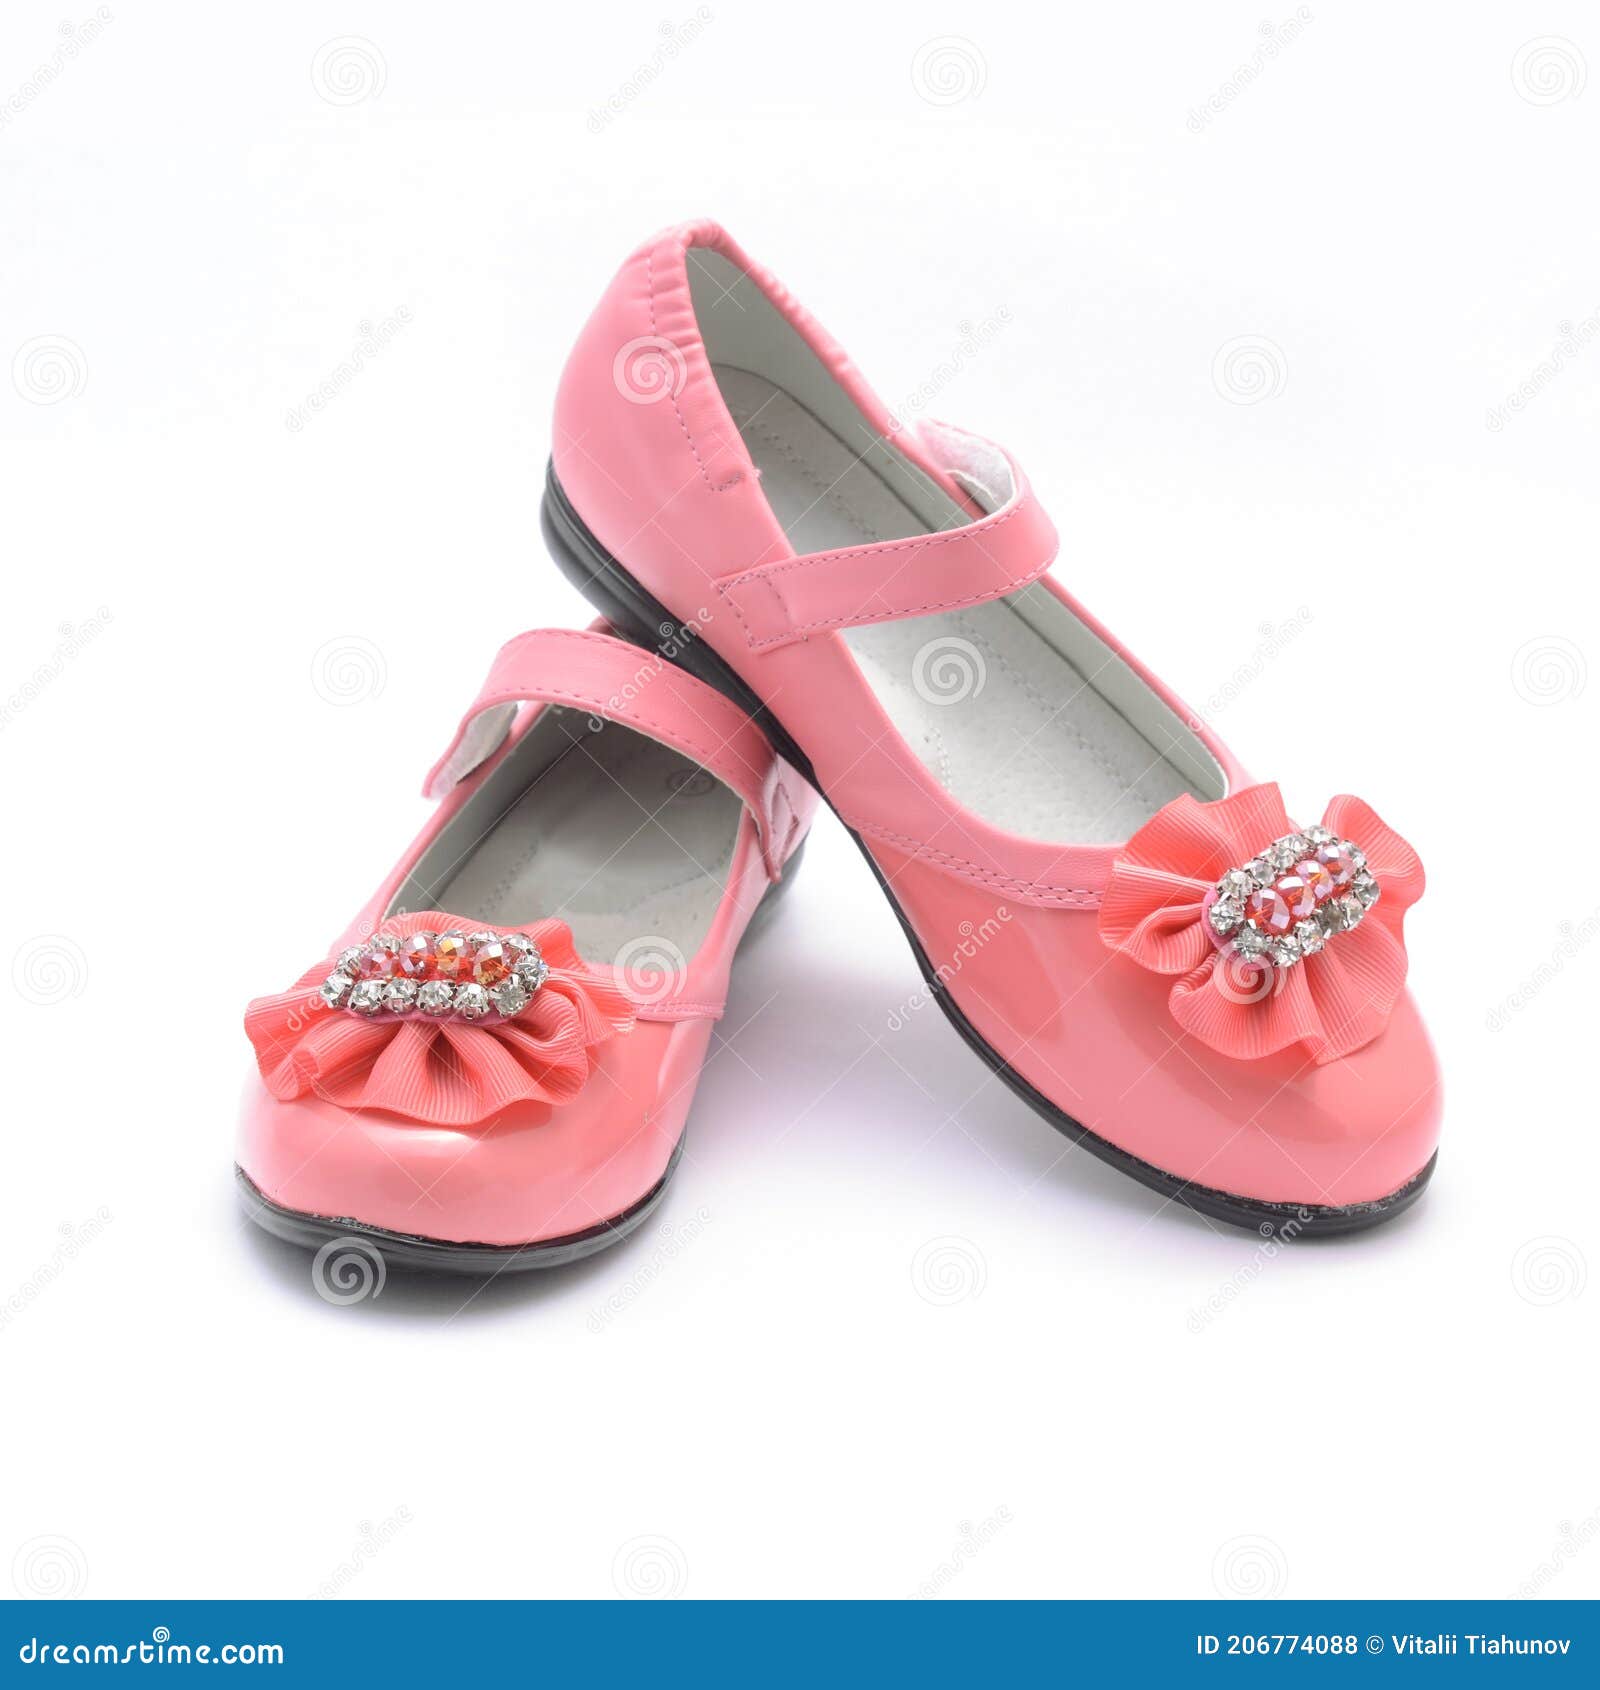 Children Pink Shoes Isolated on White Stock Photo - Image of children ...